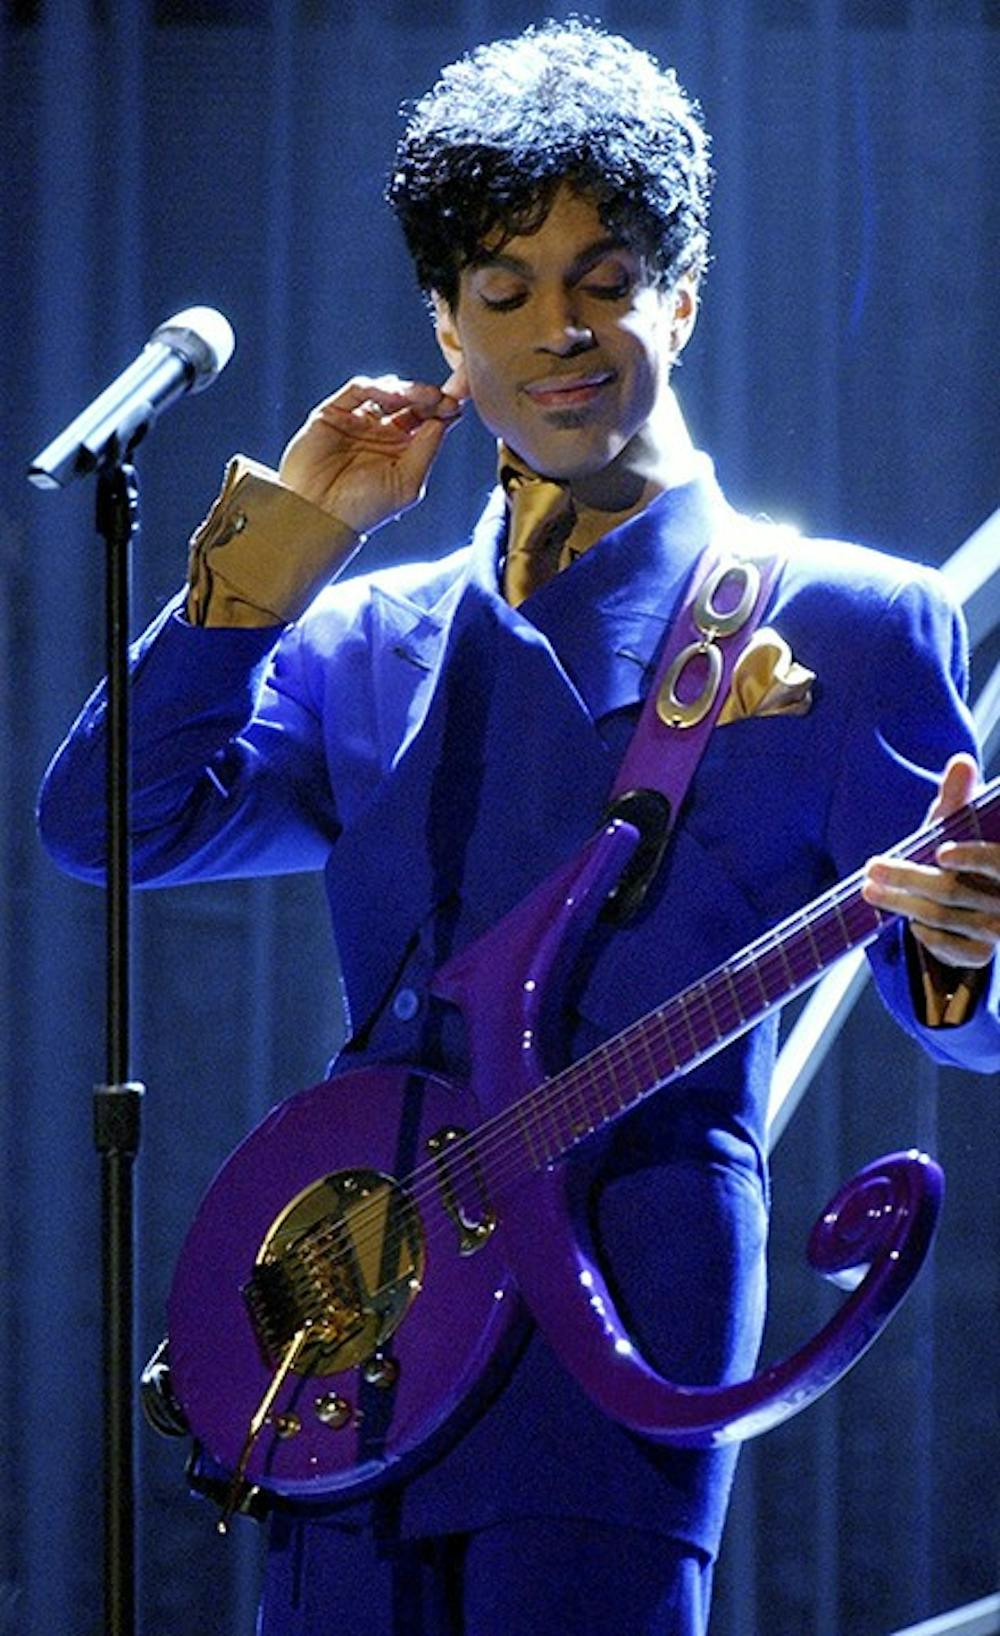 Prince performs &quot;Purple Rain&quot; as the opening act during the 46th Annual Grammy Awards show on Feb. 8, 2004 at the Staples Center in Los Angeles. The Prince estate and its new partners at Sony Legacy have announced a new plan to issue a batch of old videos every week through mid-December from the Minnesota music legendâ€™s 1995-2010 era, a period of recordings that Sony now oversees and is marketing again. (Richard Hartog/Los Angeles Times/TNS) 